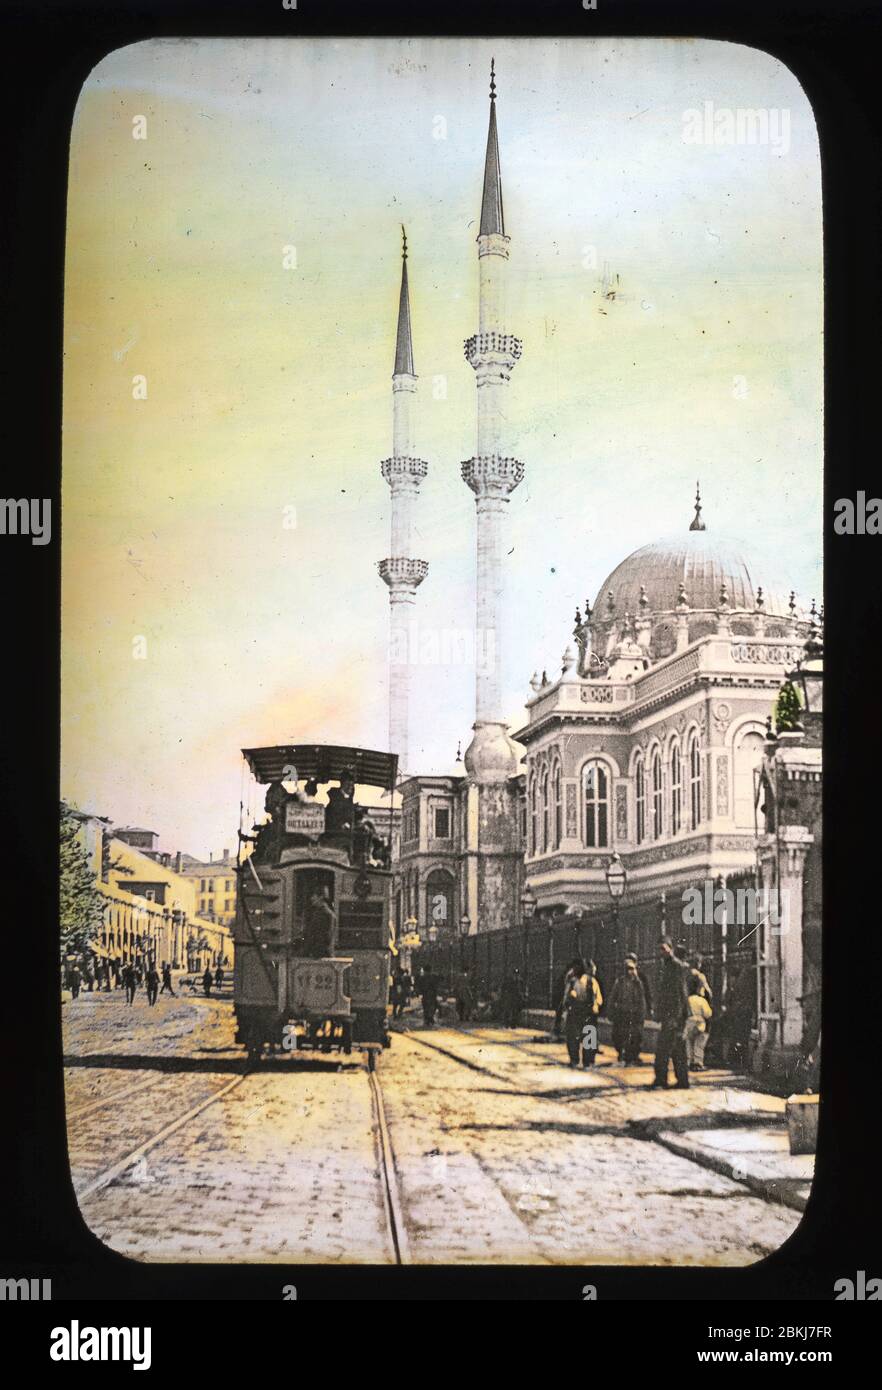 Istanbul Constantinople Tophane Nusretiye Mosque with tram passing; color slide from around 1910. Photograph on dry glass plate from the Herry W. Schaefer collection. Stock Photo